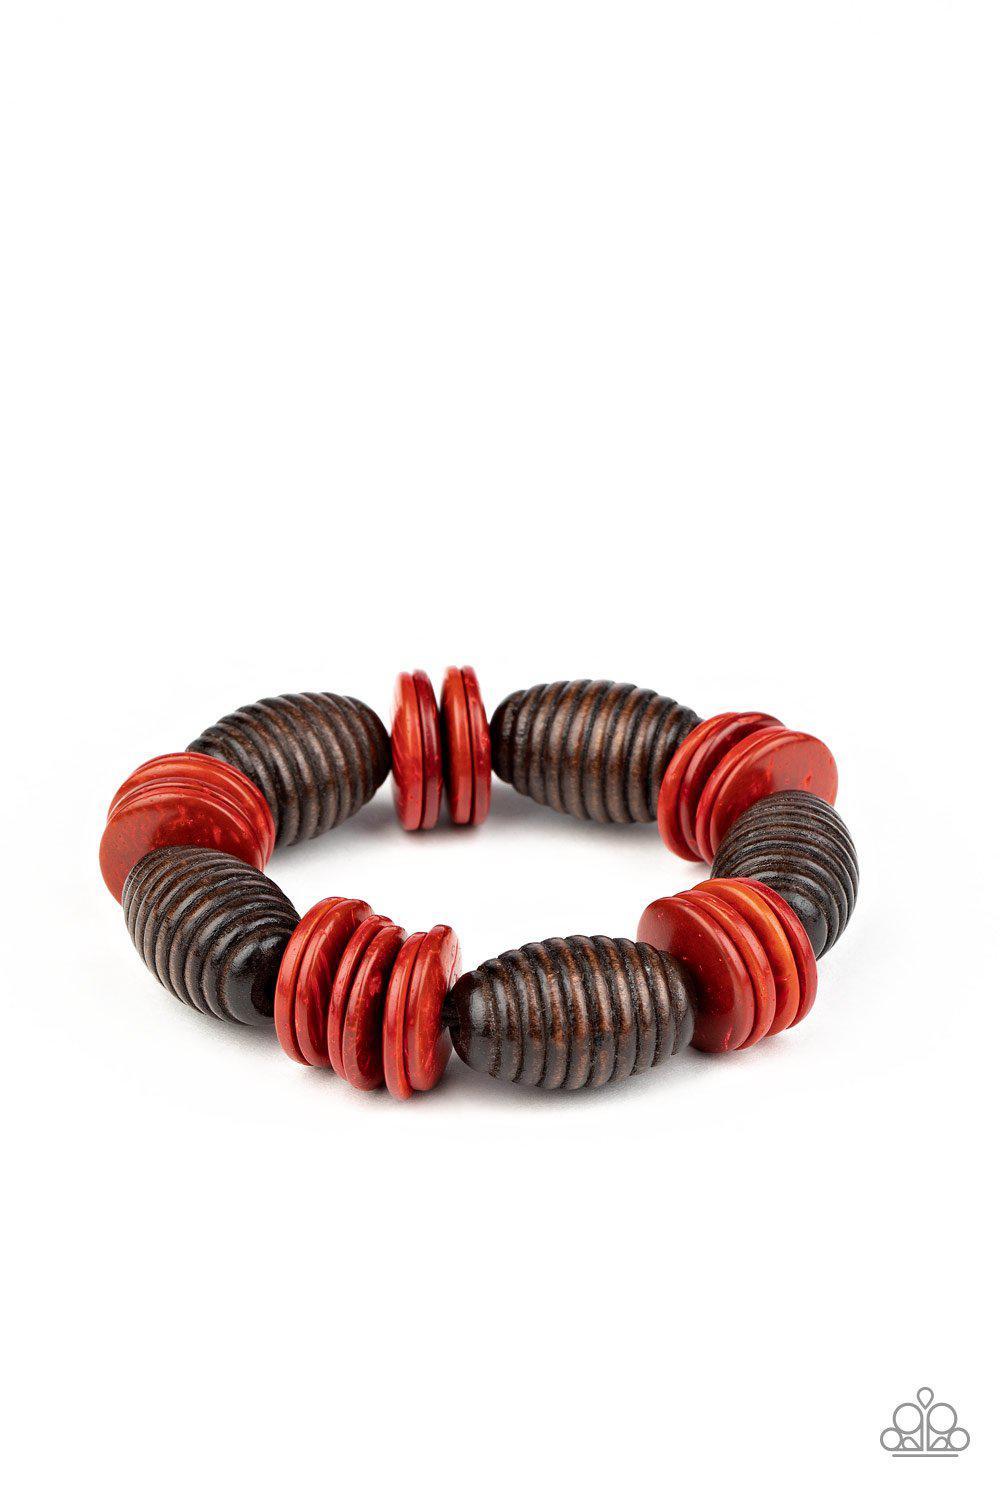 Caribbean Castaway Red and Brown Wood Bracelet - Paparazzi Accessories-CarasShop.com - $5 Jewelry by Cara Jewels